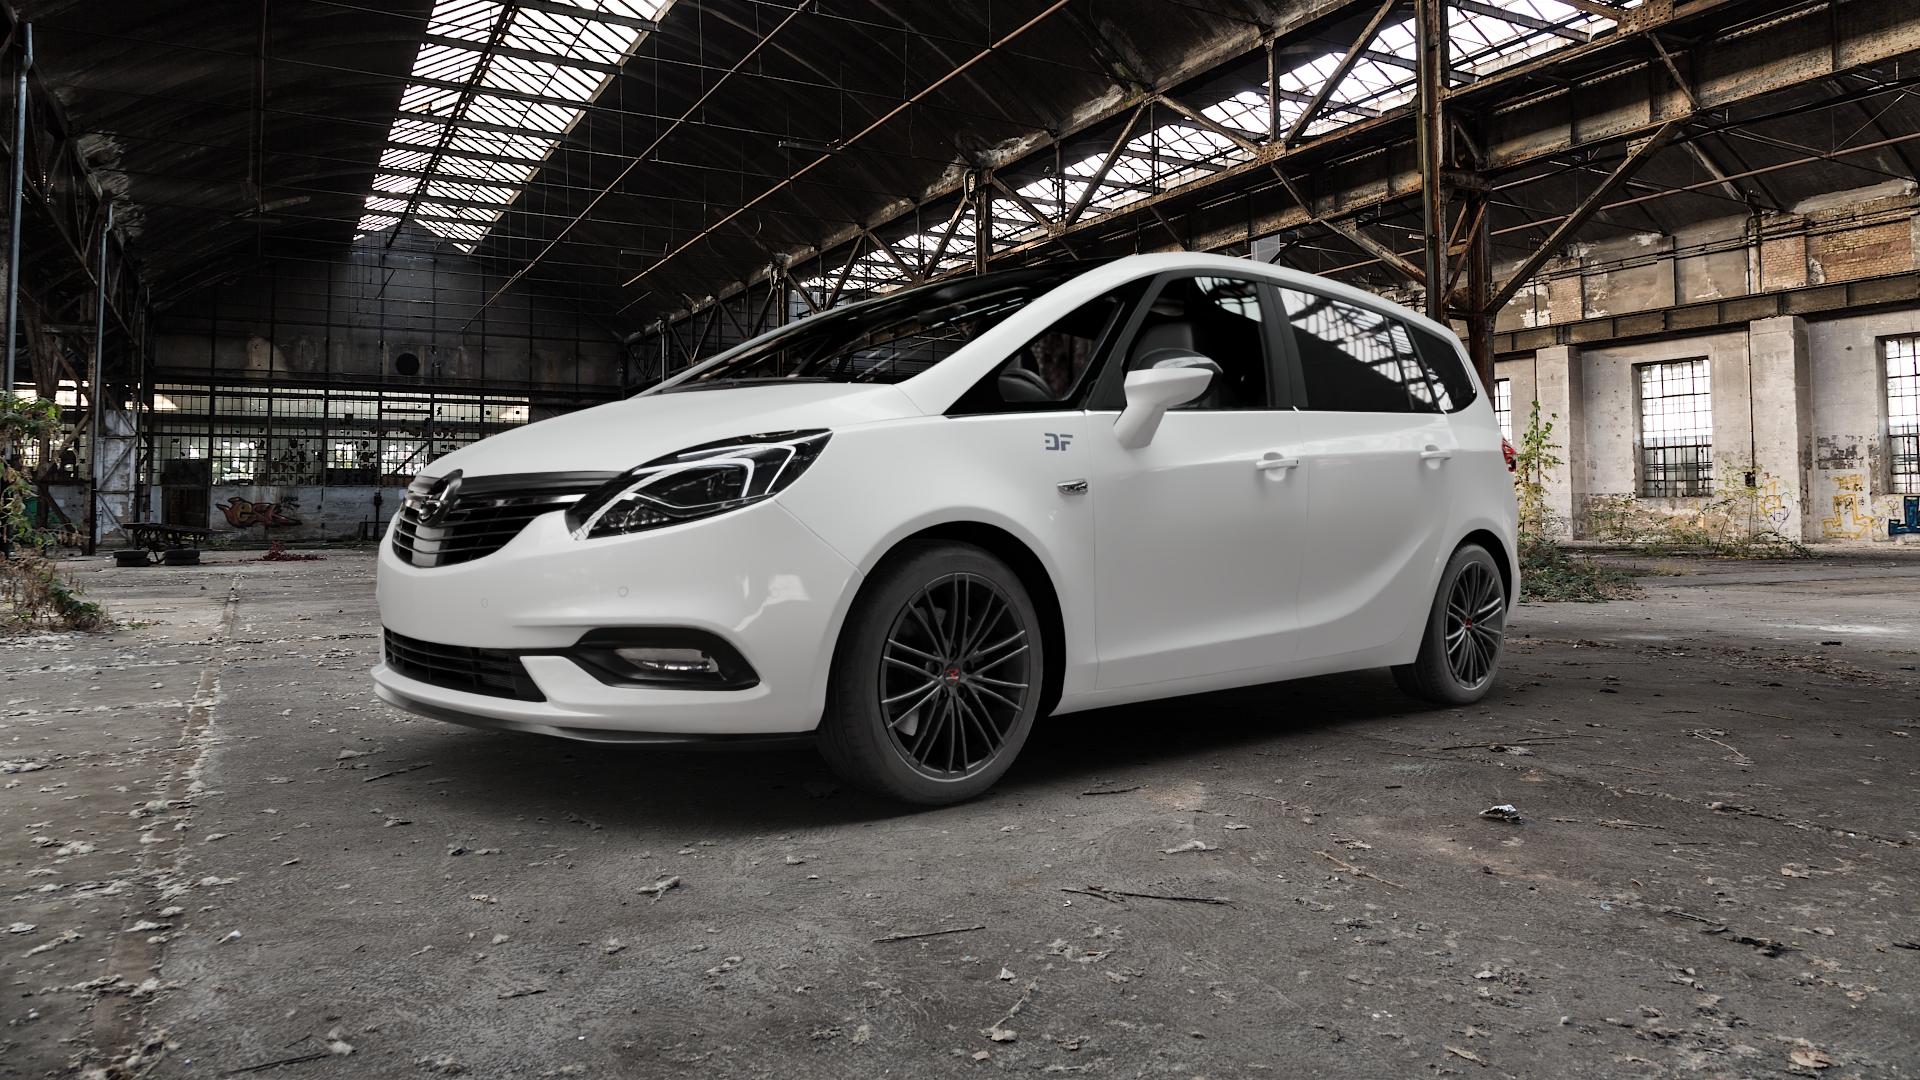 Opel Zafira C Tourer Facelift 1,6l Turbo 147kW (200 hp) Wheels and Tyre  Packages